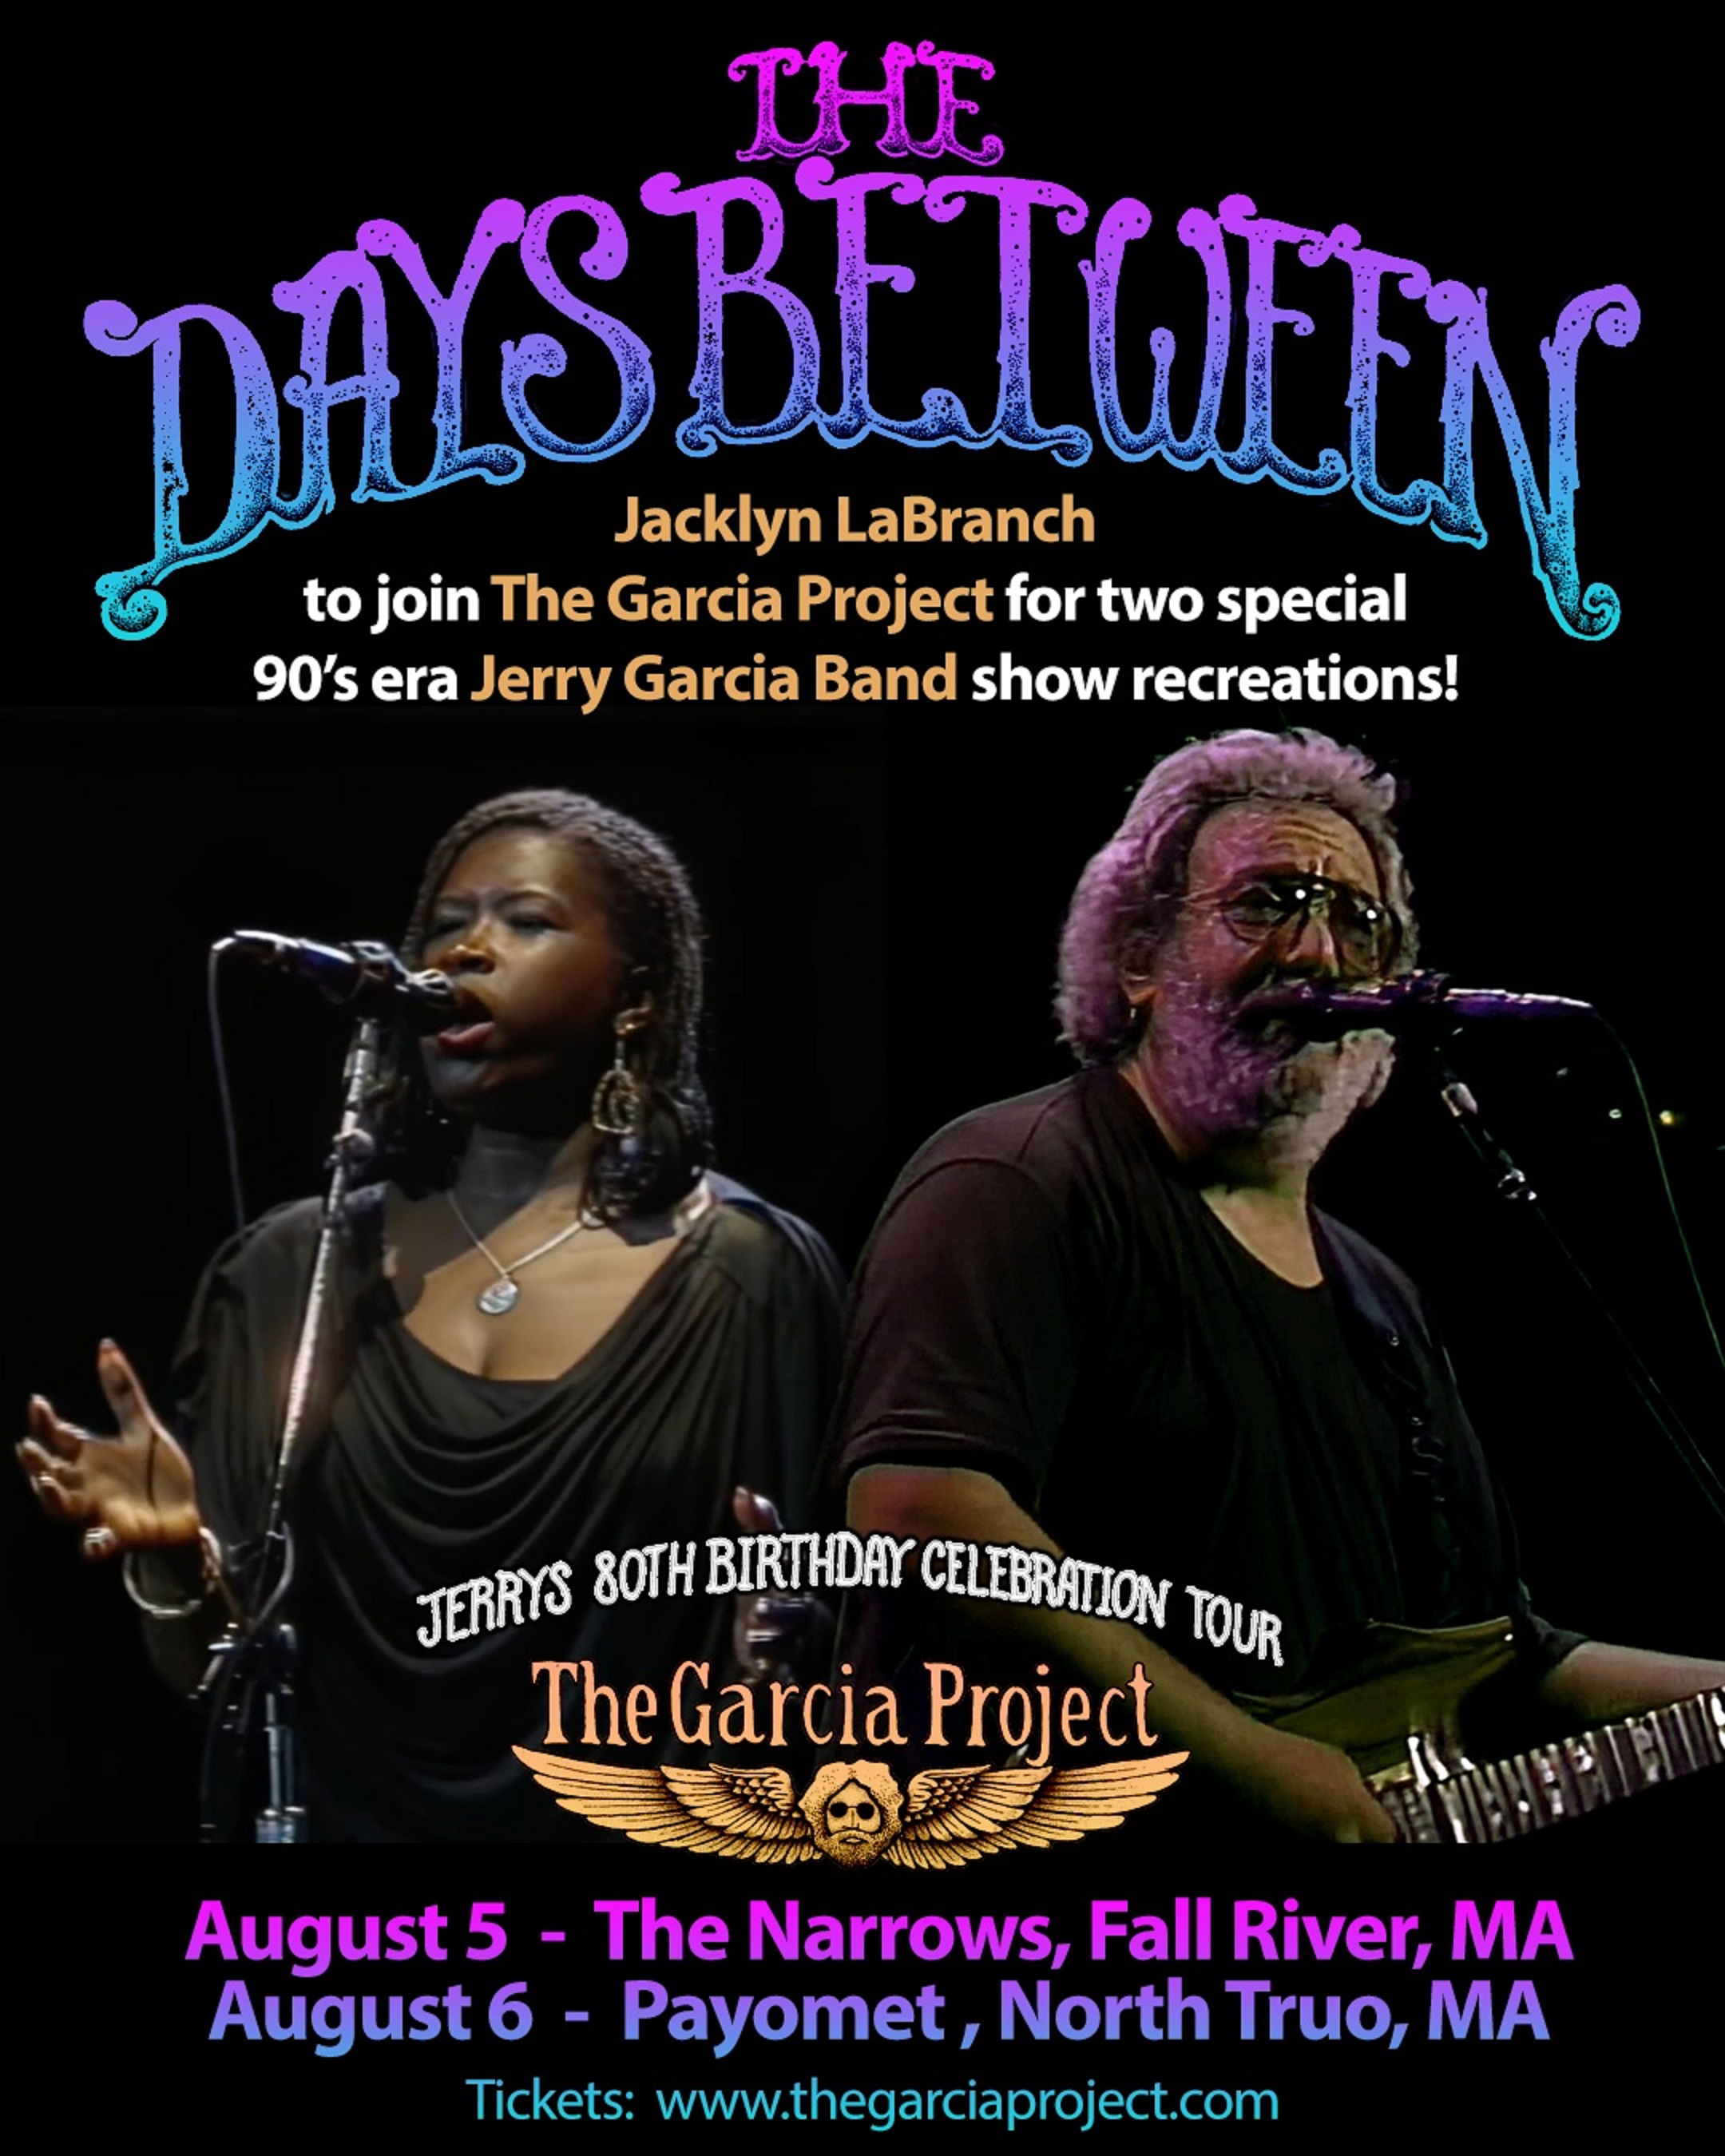 Jacklyn LaBranch to join The Garcia Project on August 5 and August 6 as part of their “Days Between” tour